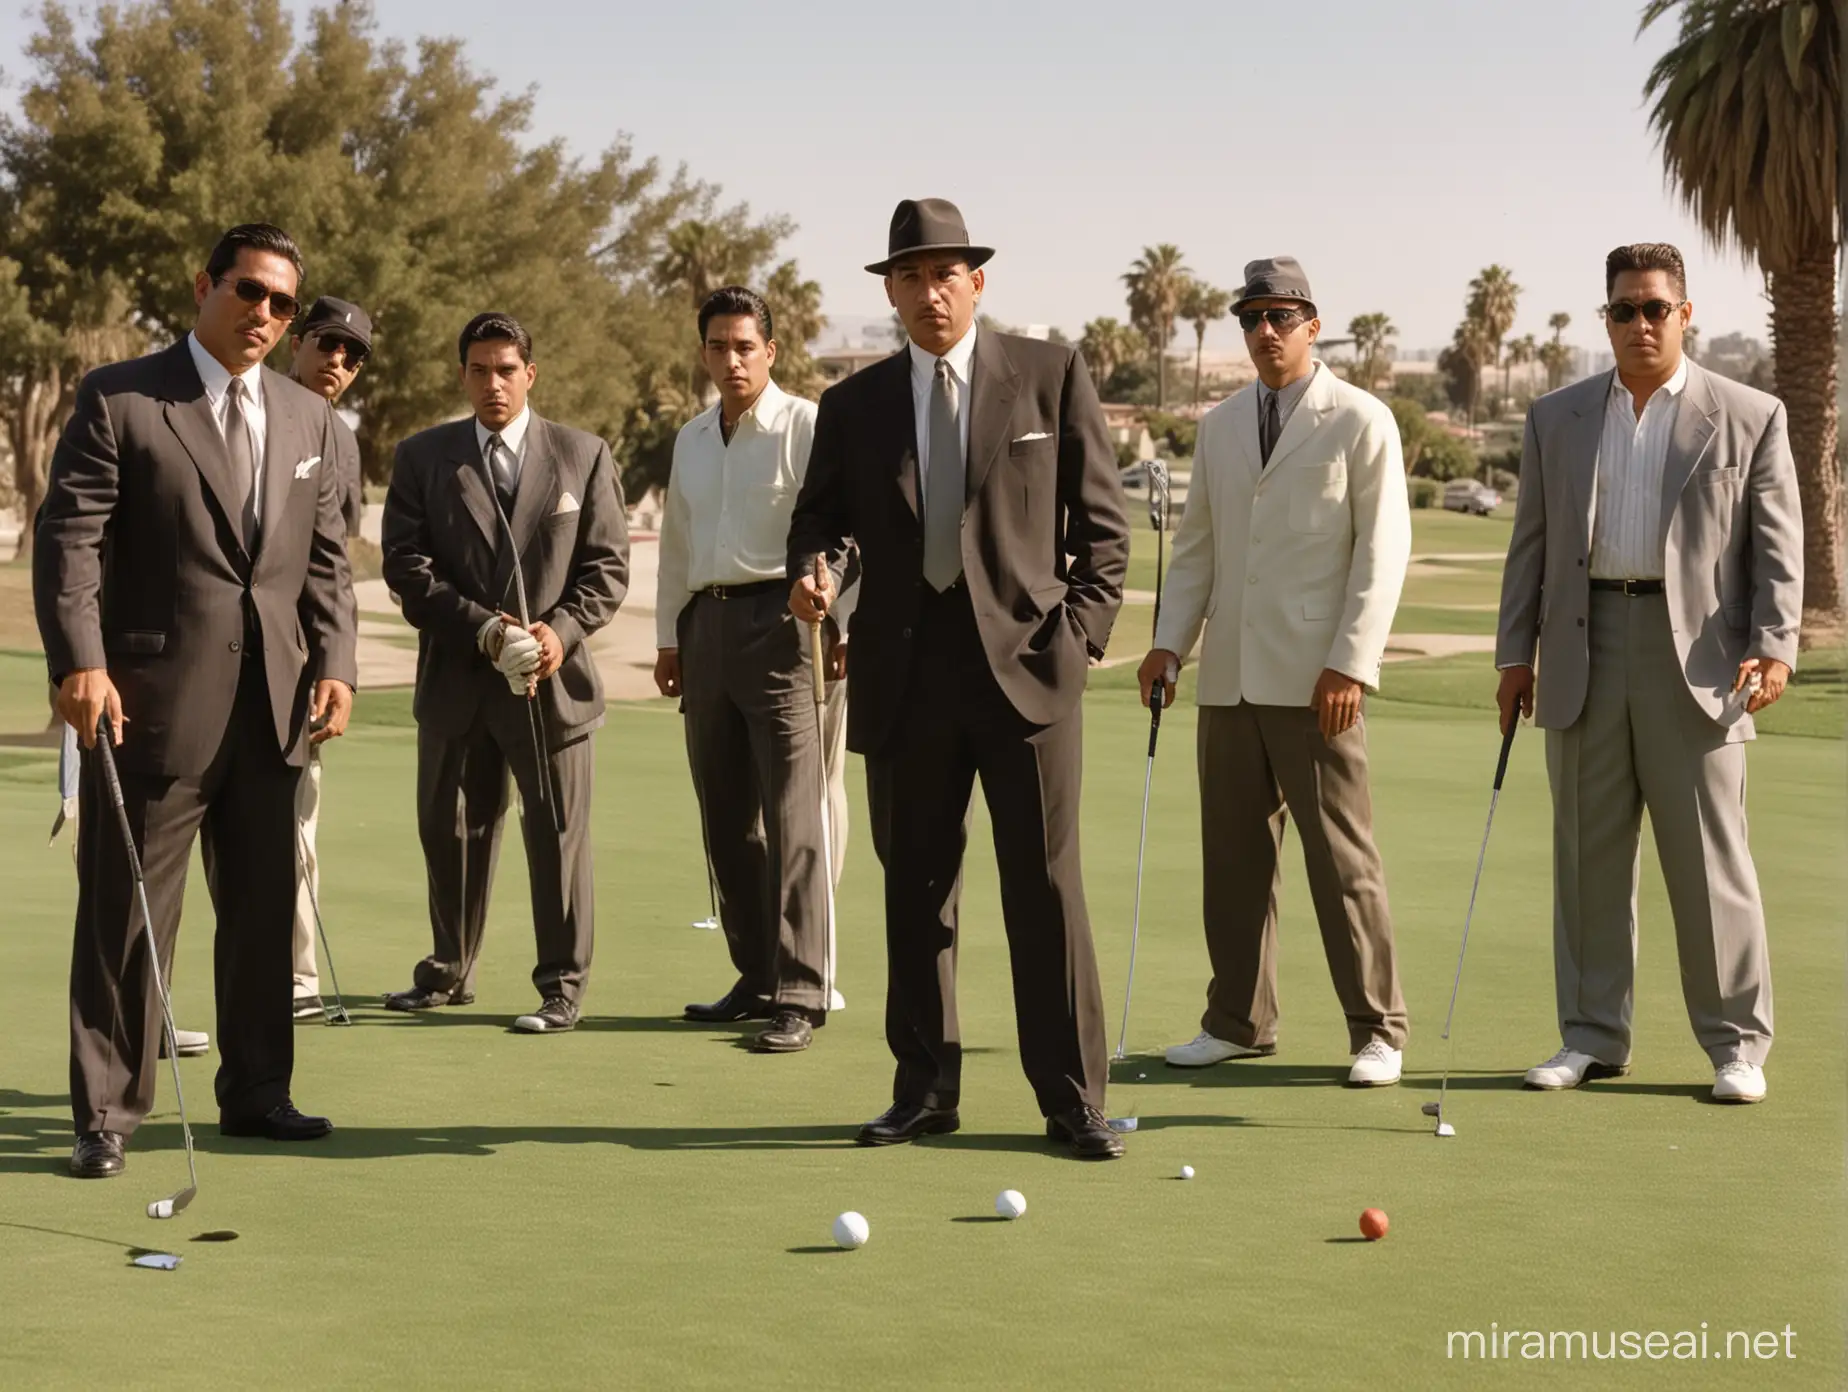 Cool hispanic male gangsters playing golf in 1990s los angeles